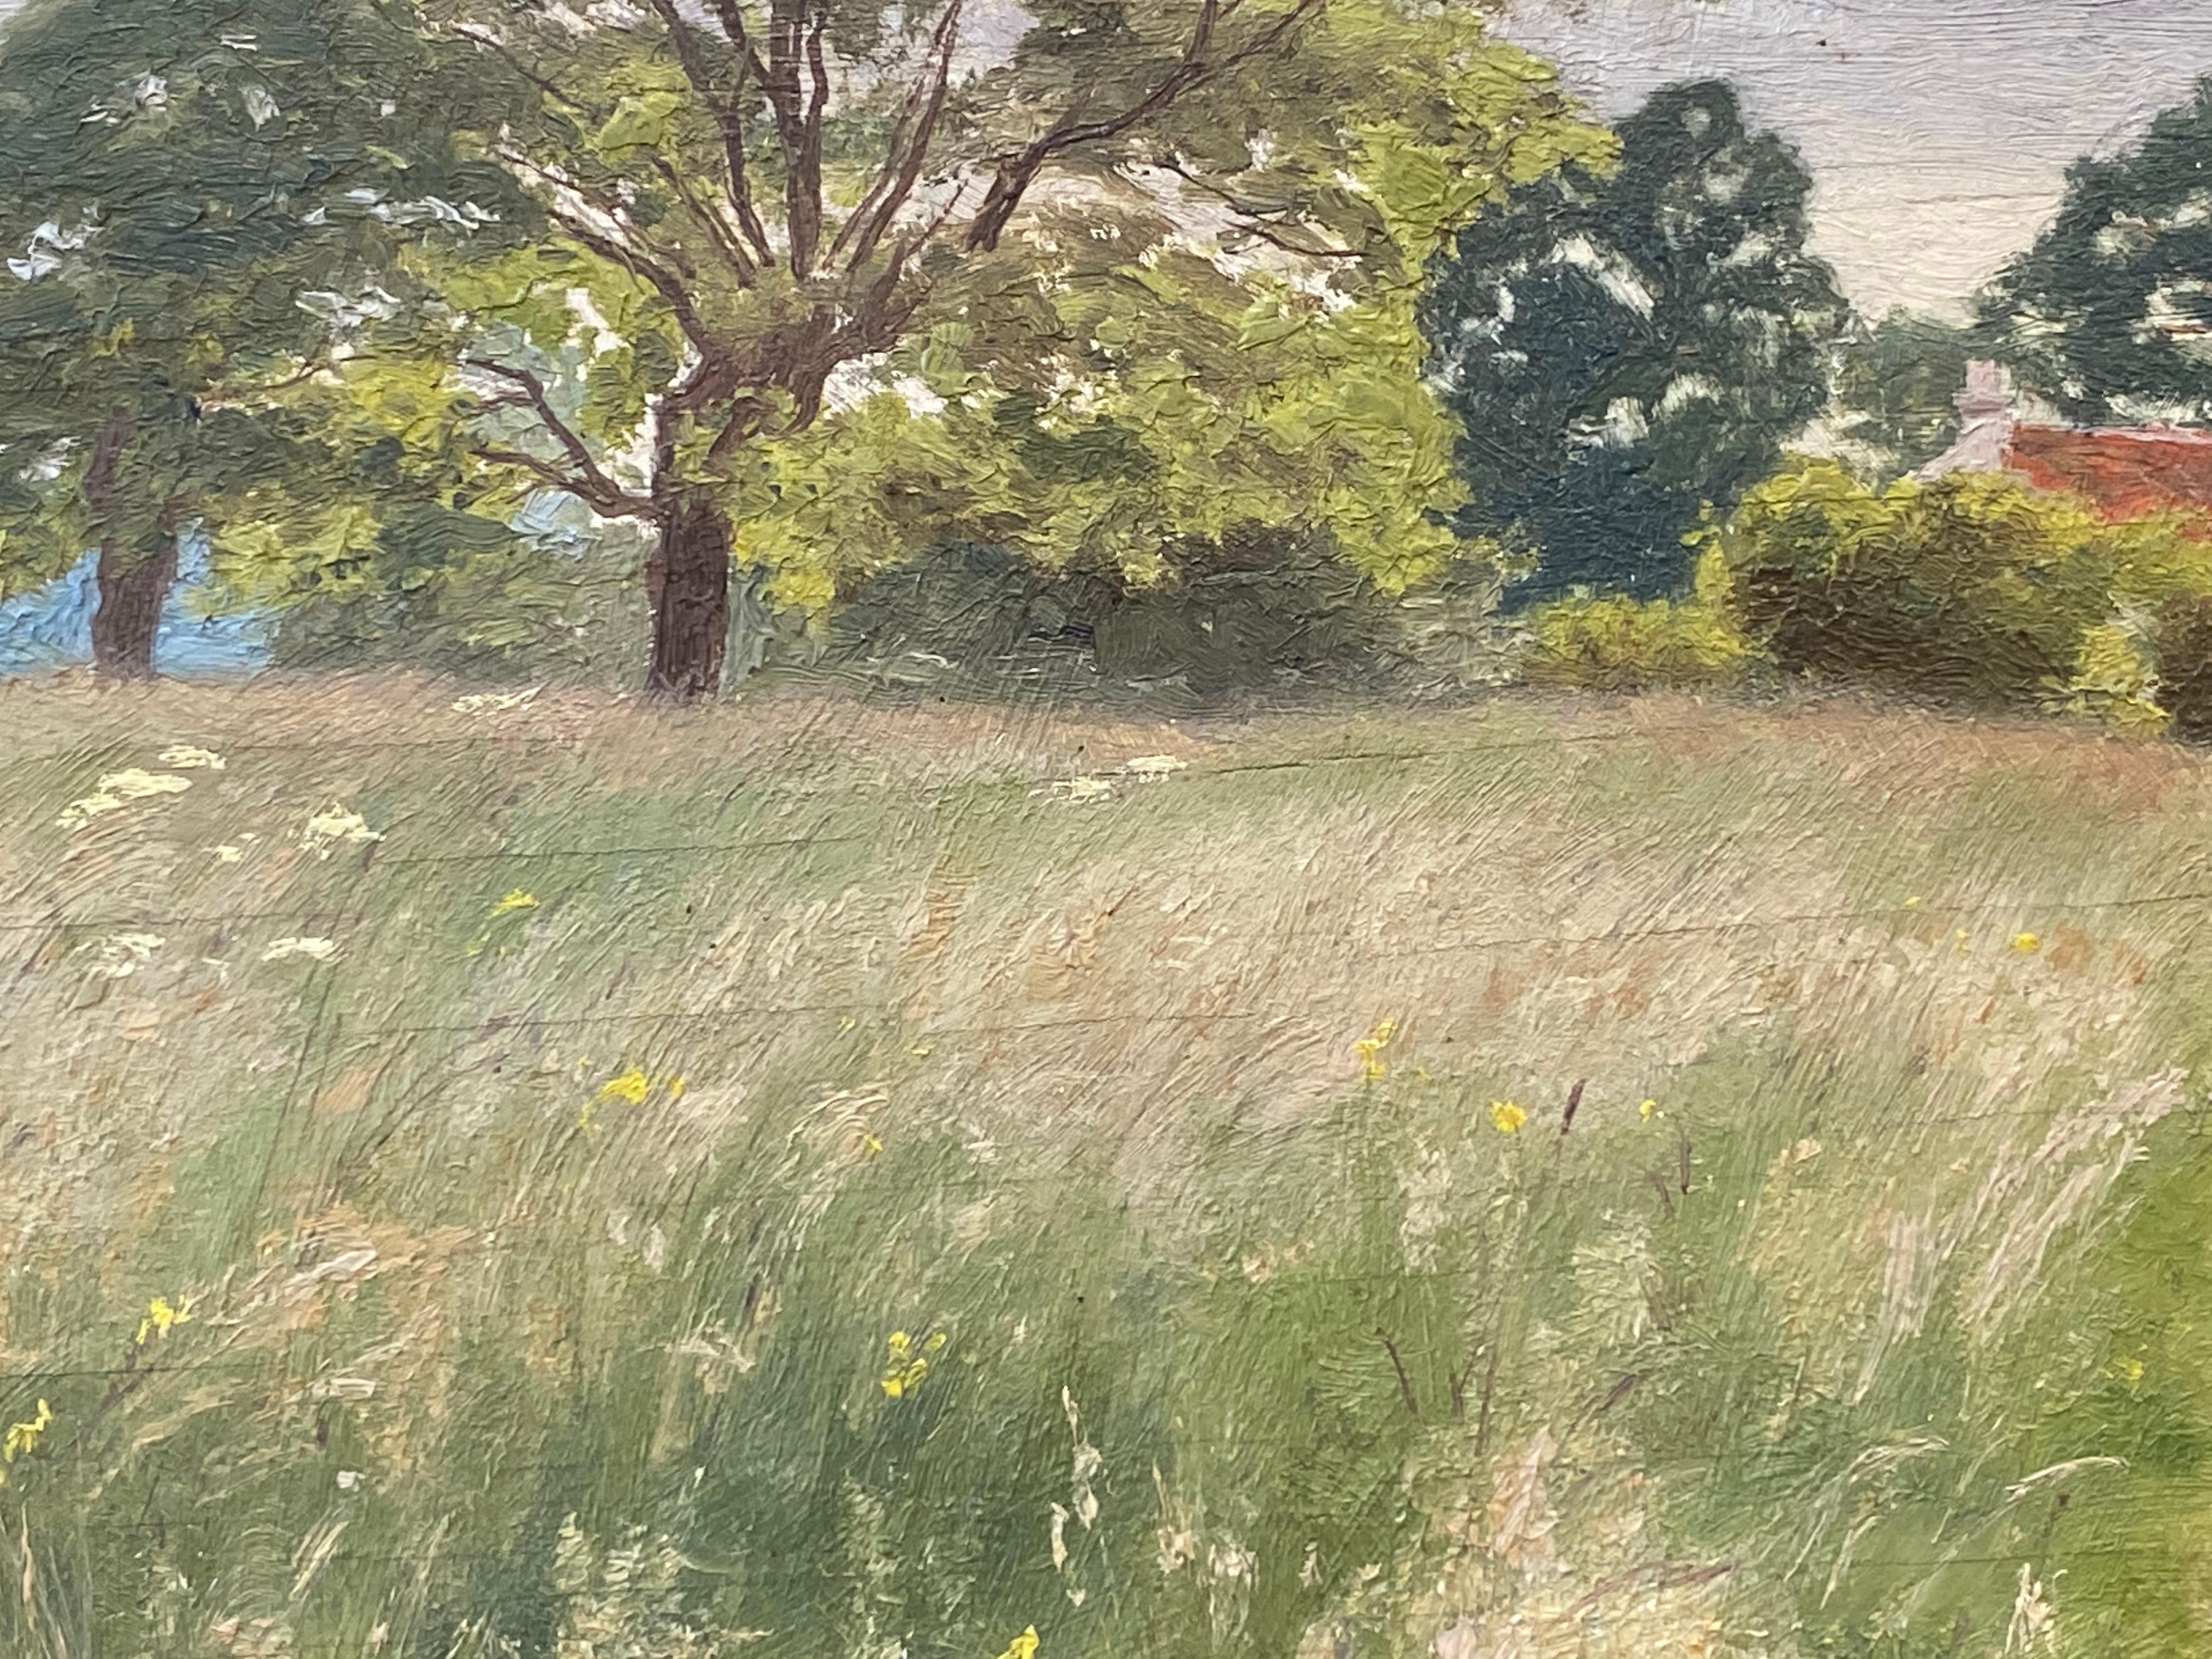  Impressionist Antique Painting - Figure In A Beautiful Open Field Track - Beige Landscape Painting by French Impressionist